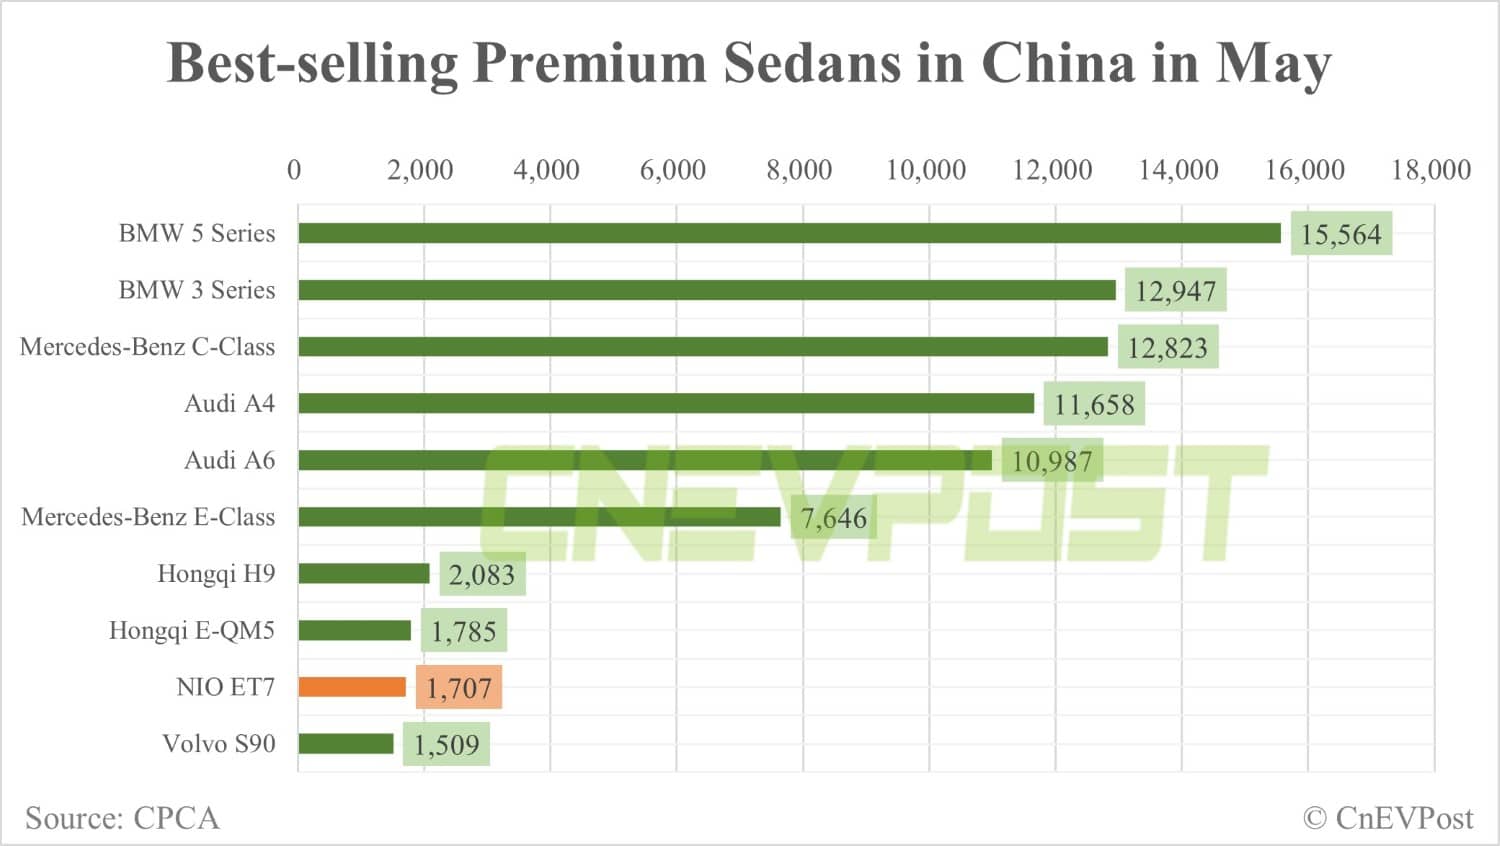 NIO ET7 in top 10 best-selling premium sedans in China for second consecutive month-CnEVPost